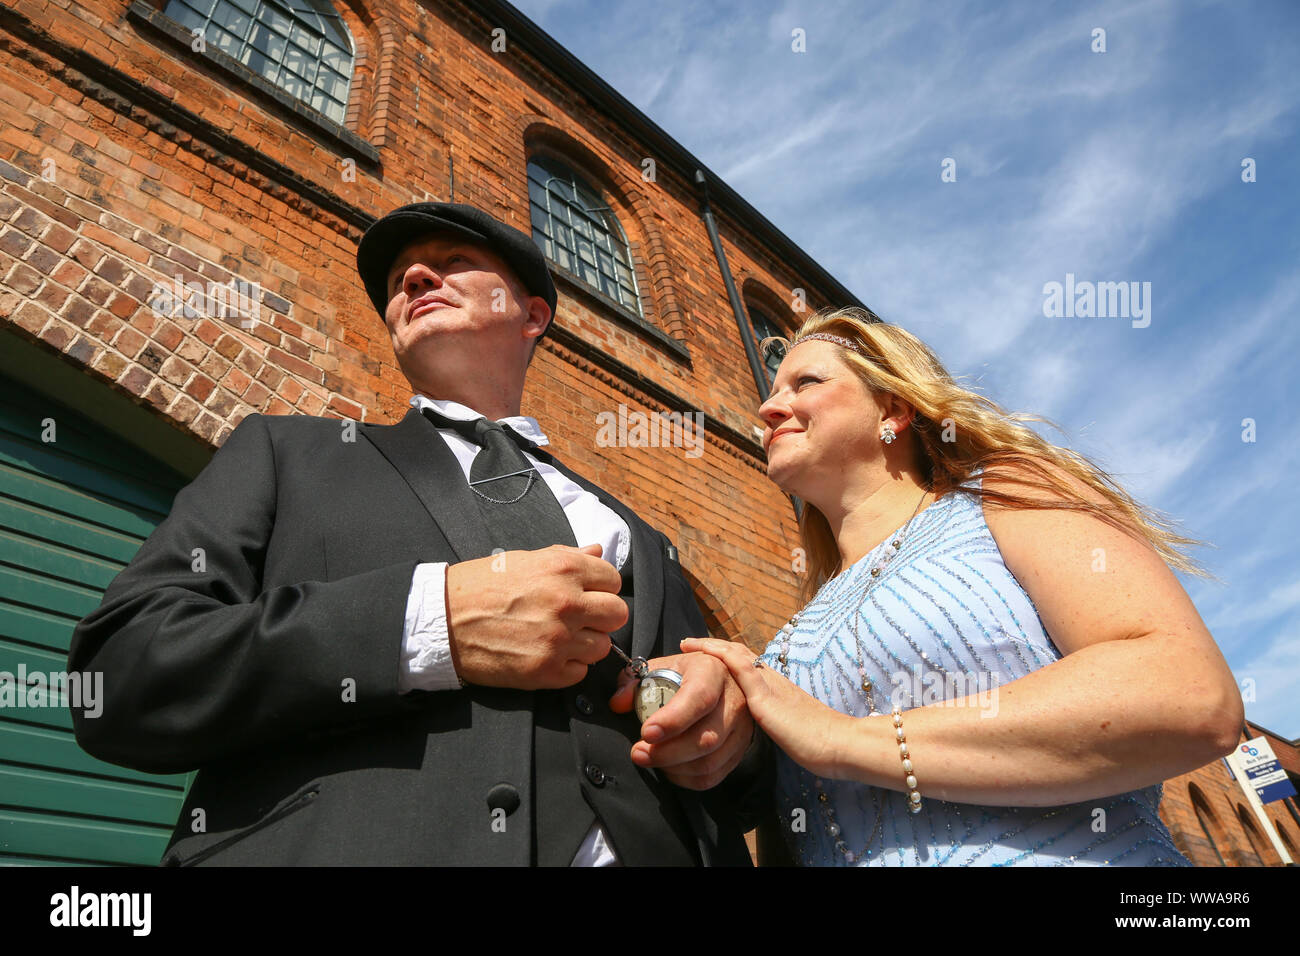 Birmingham, UK. 14th Sep, 2019. Visitors to The Legitimate Peaky Blinders Festival arrive in style. The hit BBC TV drama - which is set in the midlands city and is based on gang culture in the early part of the twentieth century - is celebrated with music and guest events with visitor dressed up in the style clothes worn by the cast. Credit: Peter Lopeman/Alamy Live News Stock Photo